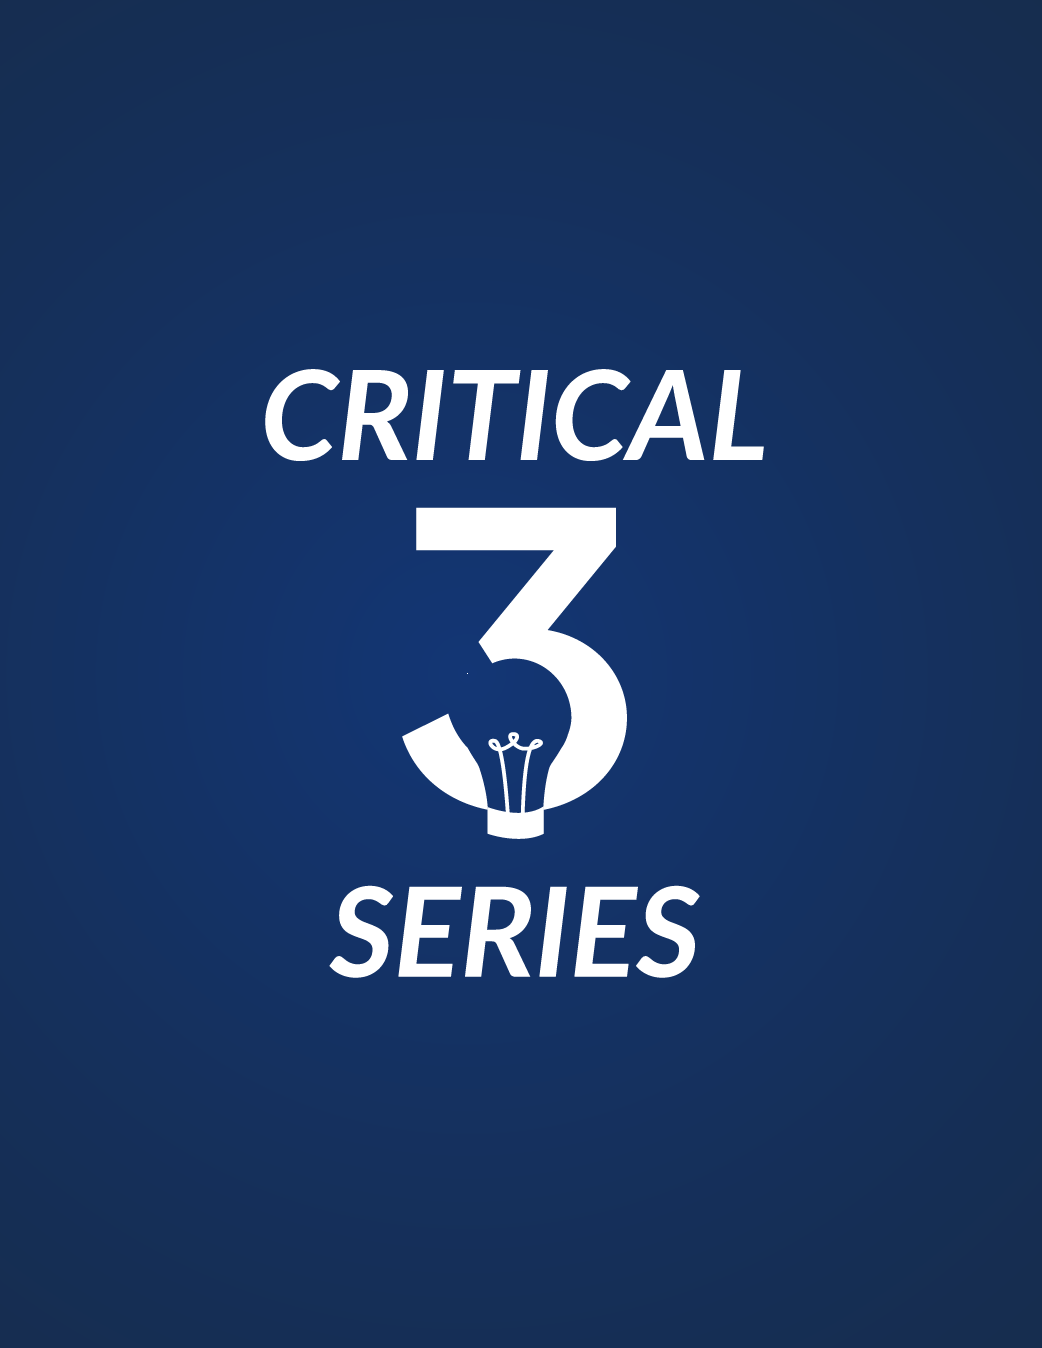 Critical 3: The Use of Polygraph Examinations During Criminal Investigations